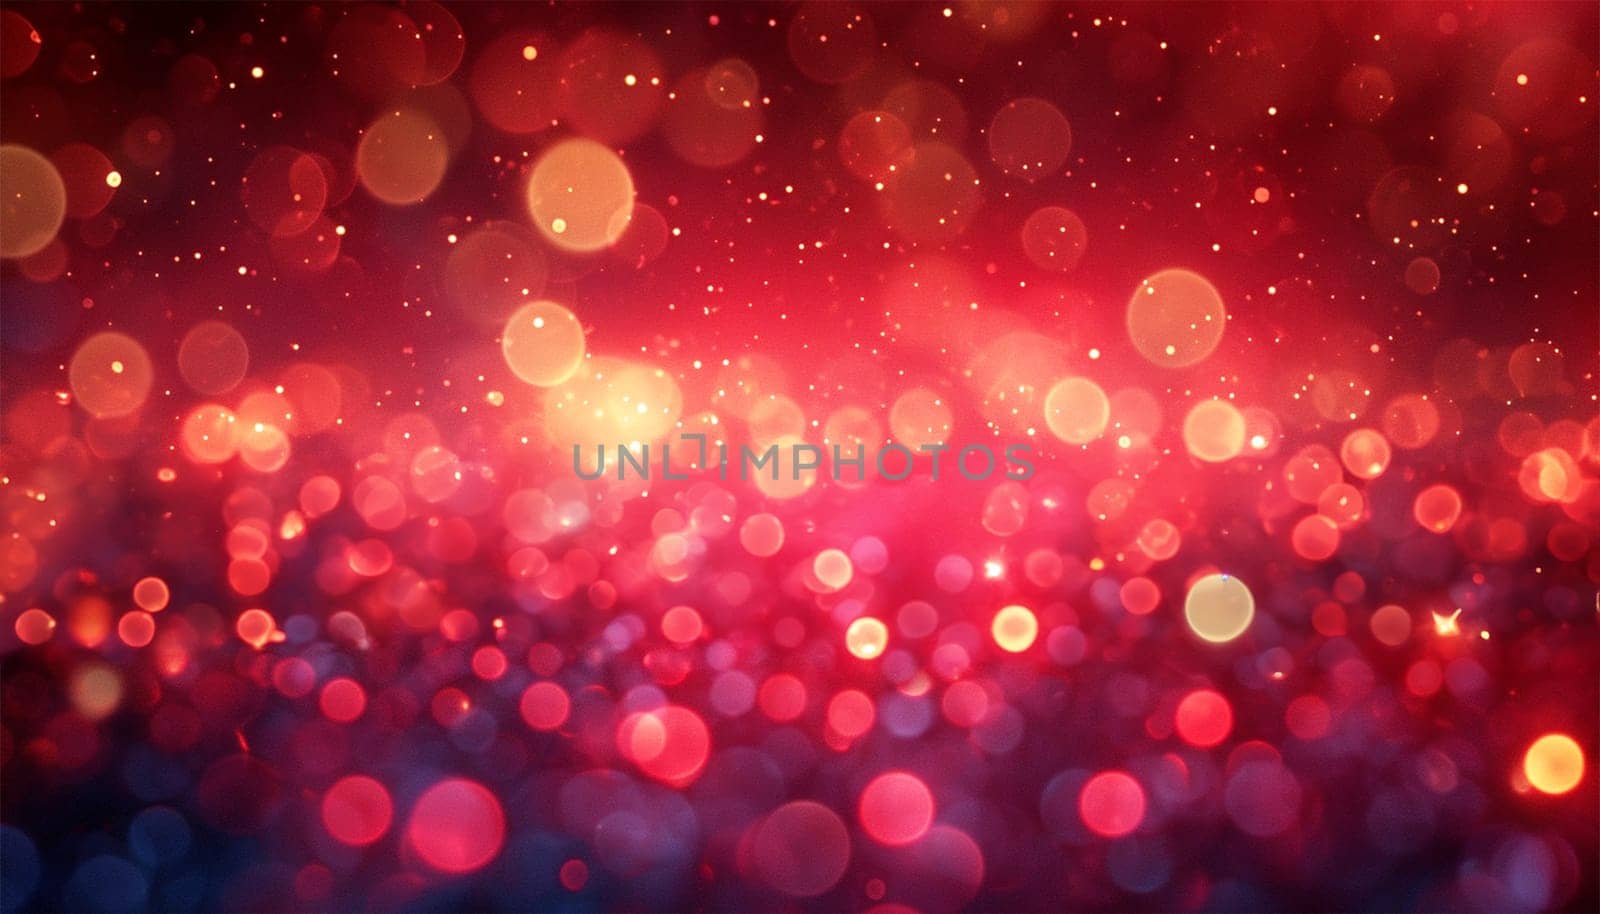 Gold and red particles waves glittering. Red sparkles glitter and rays lights bokeh abstract holiday background texture. Festive abstract design by Annebel146